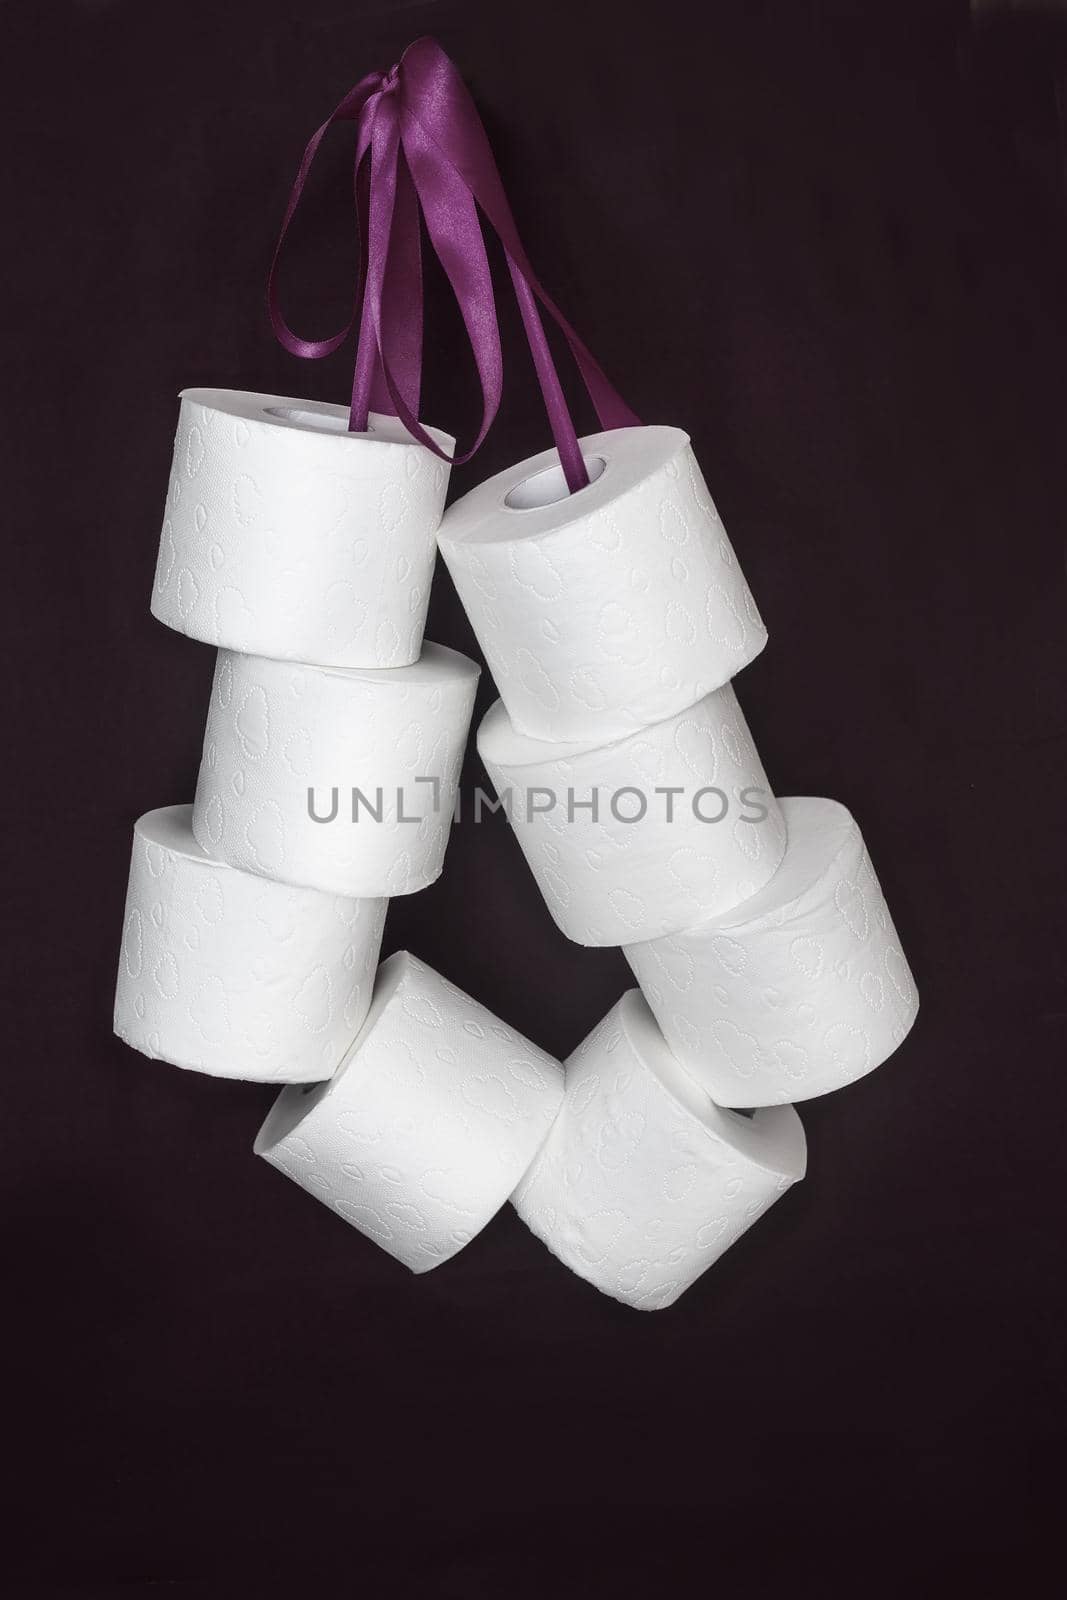 Toilet paper rolls connected by a ribbon in a bundle. by georgina198